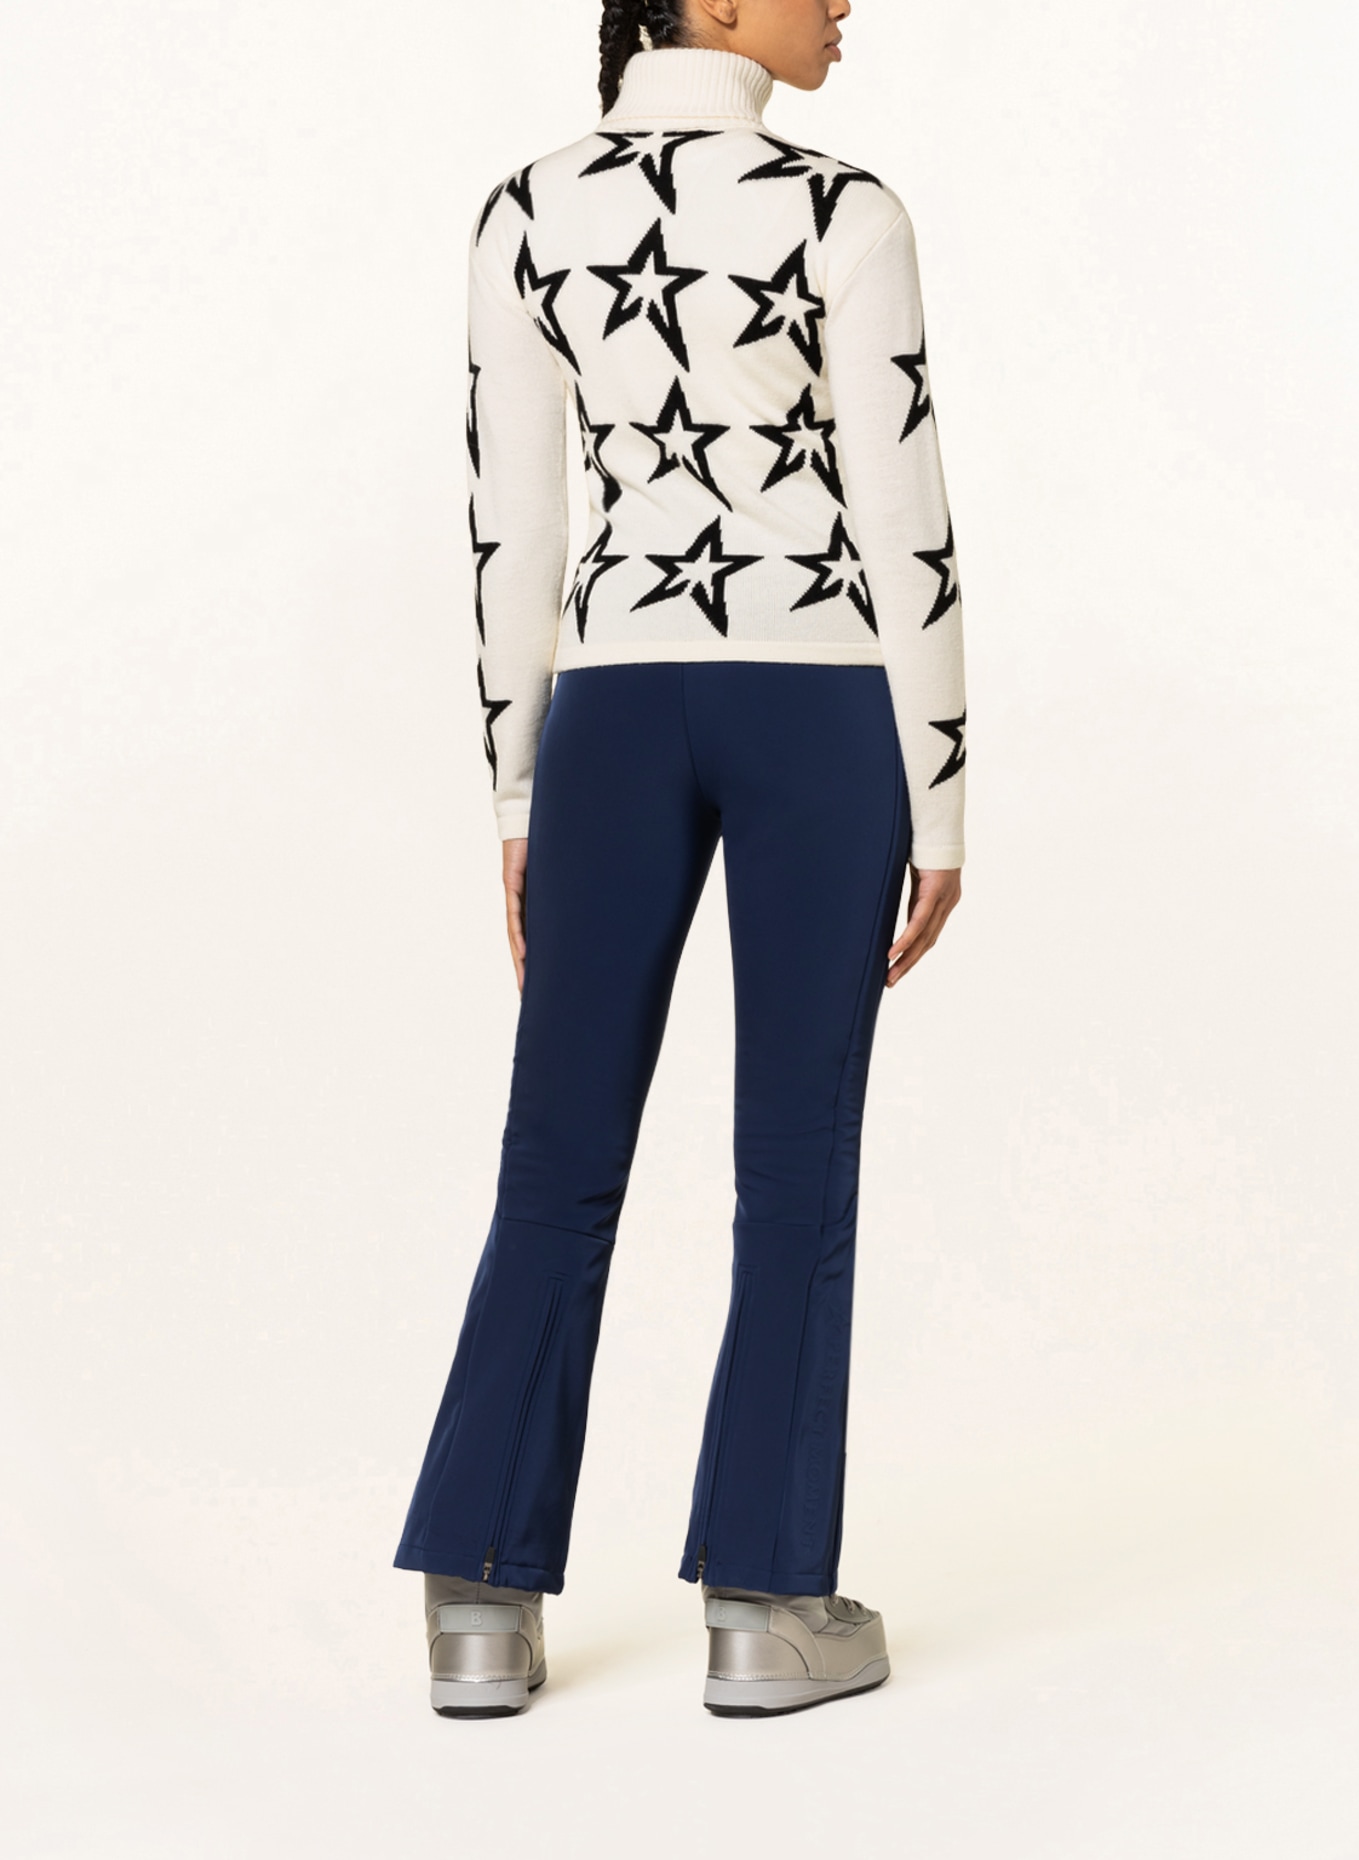 PERFECT MOMENT Turtleneck sweater STAR DUST, Color: WHITE/ BLACK (Image 3)